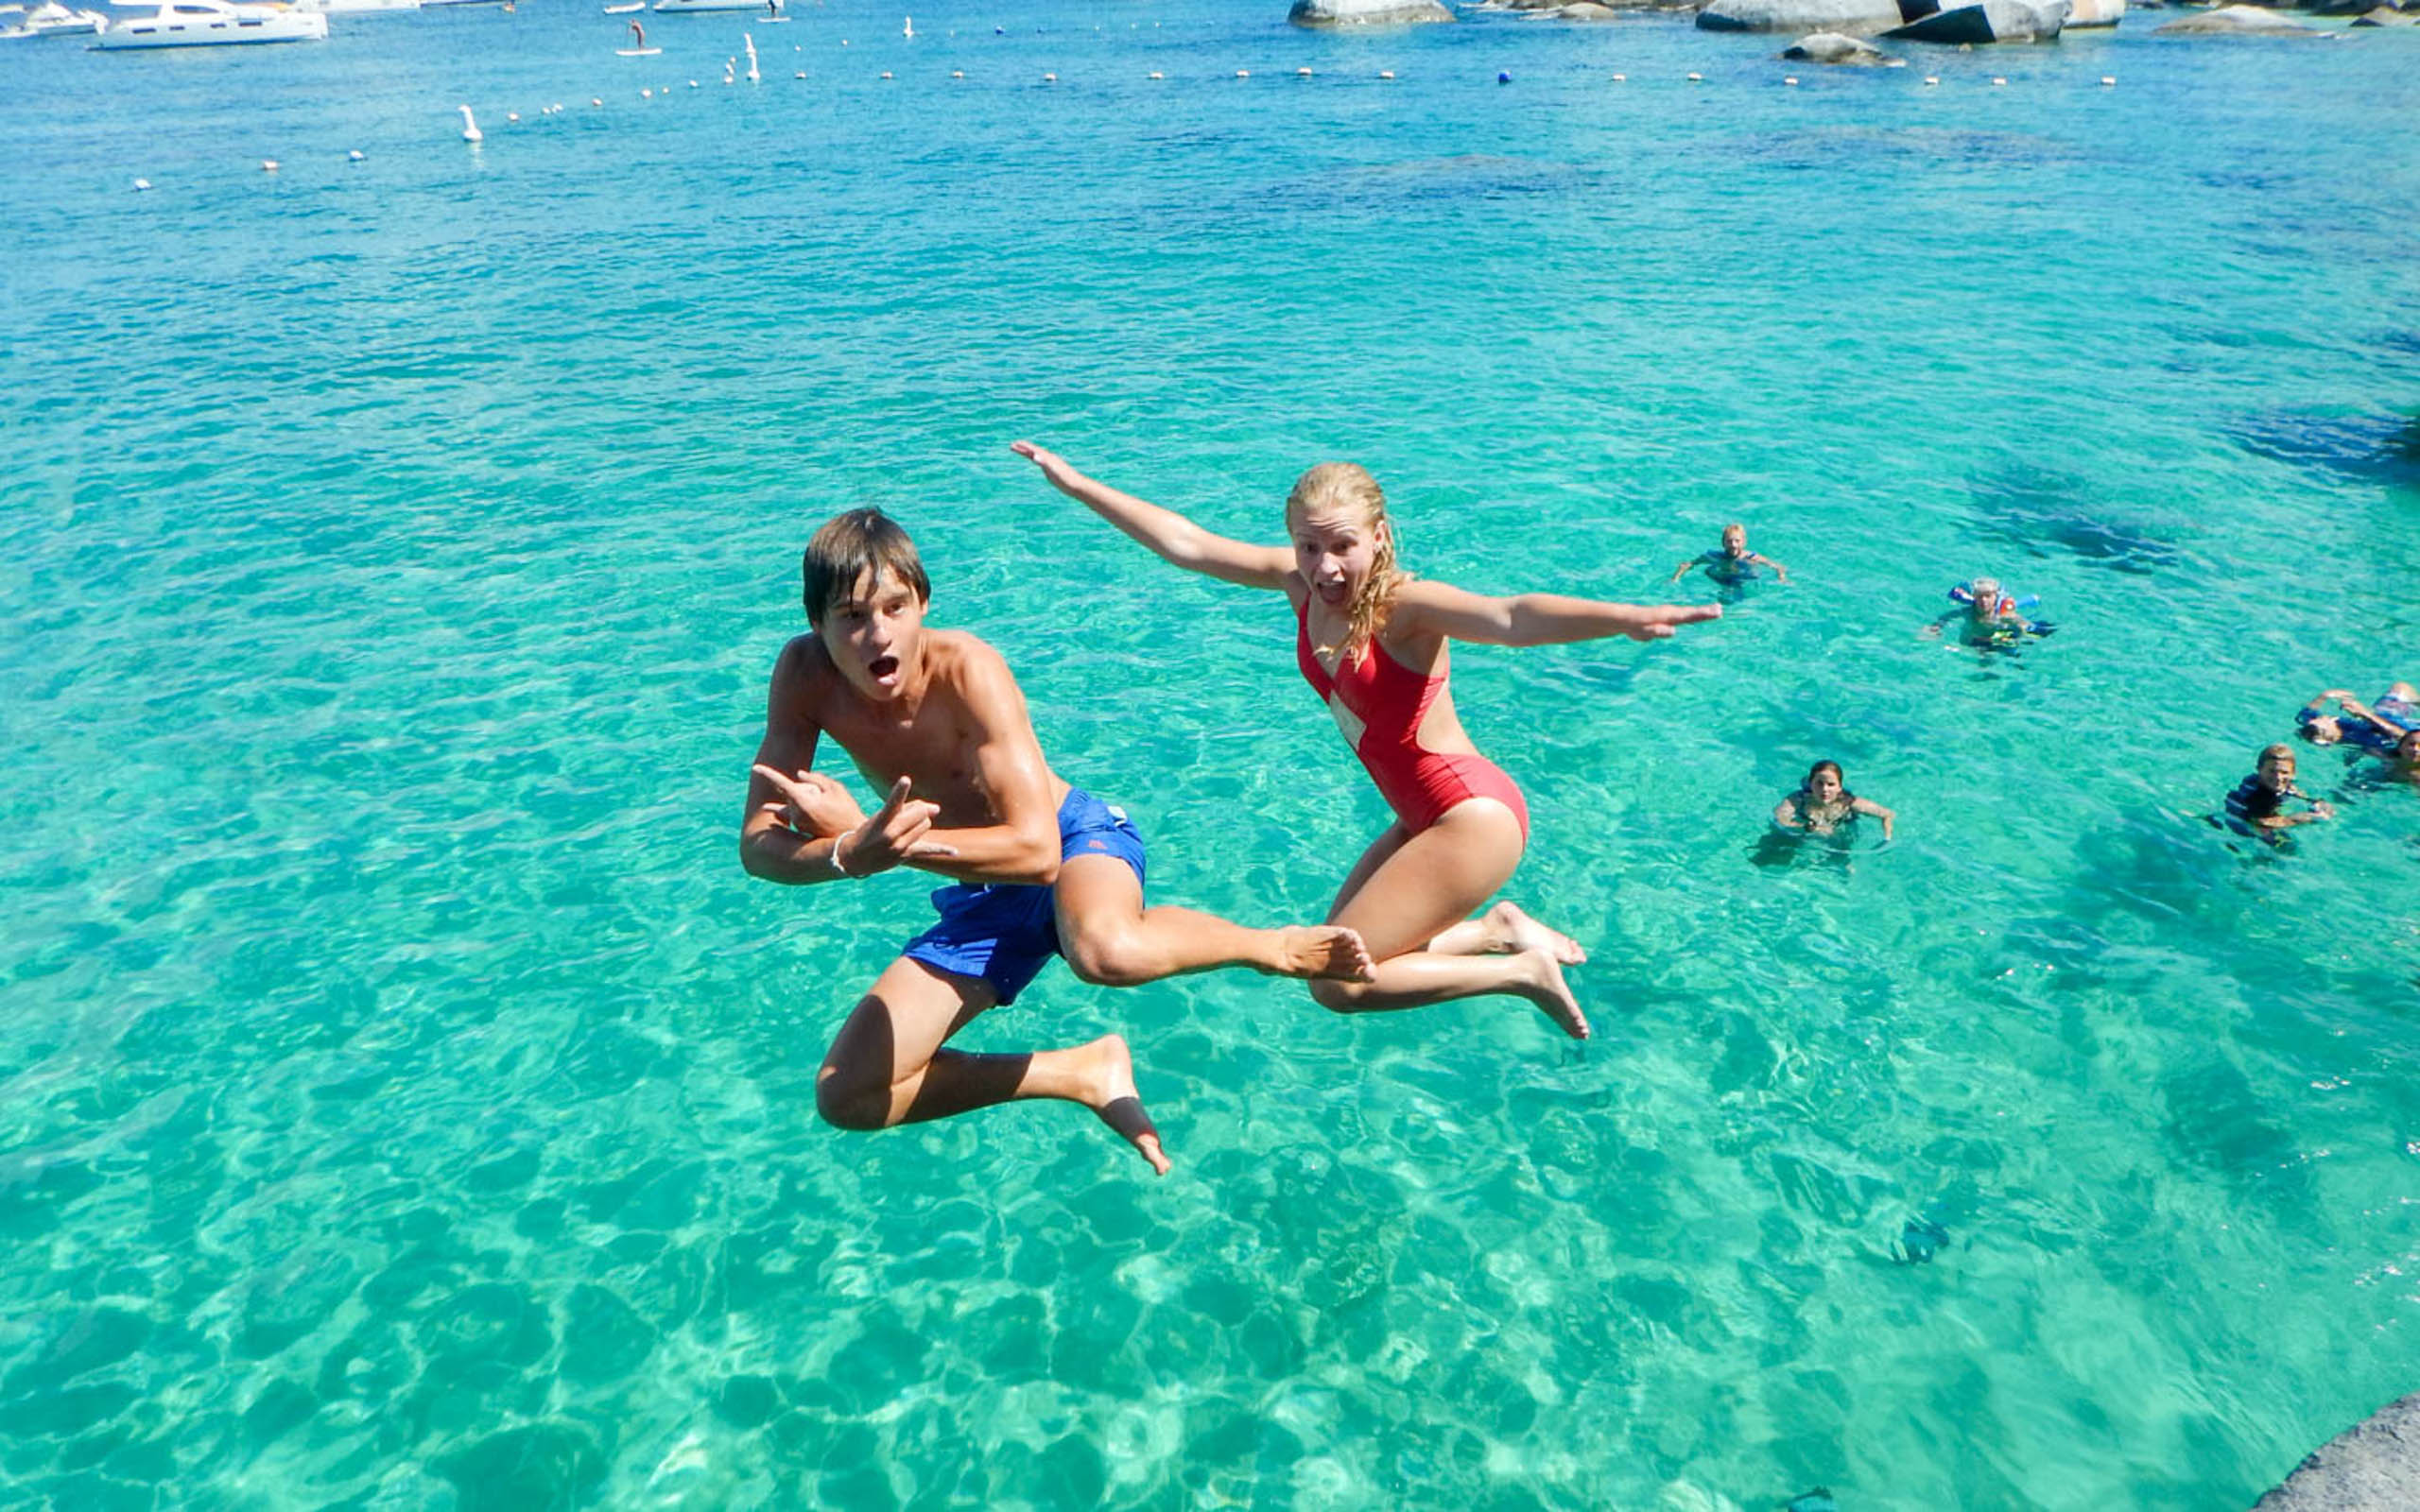 Two people jumping into the clear blue water.